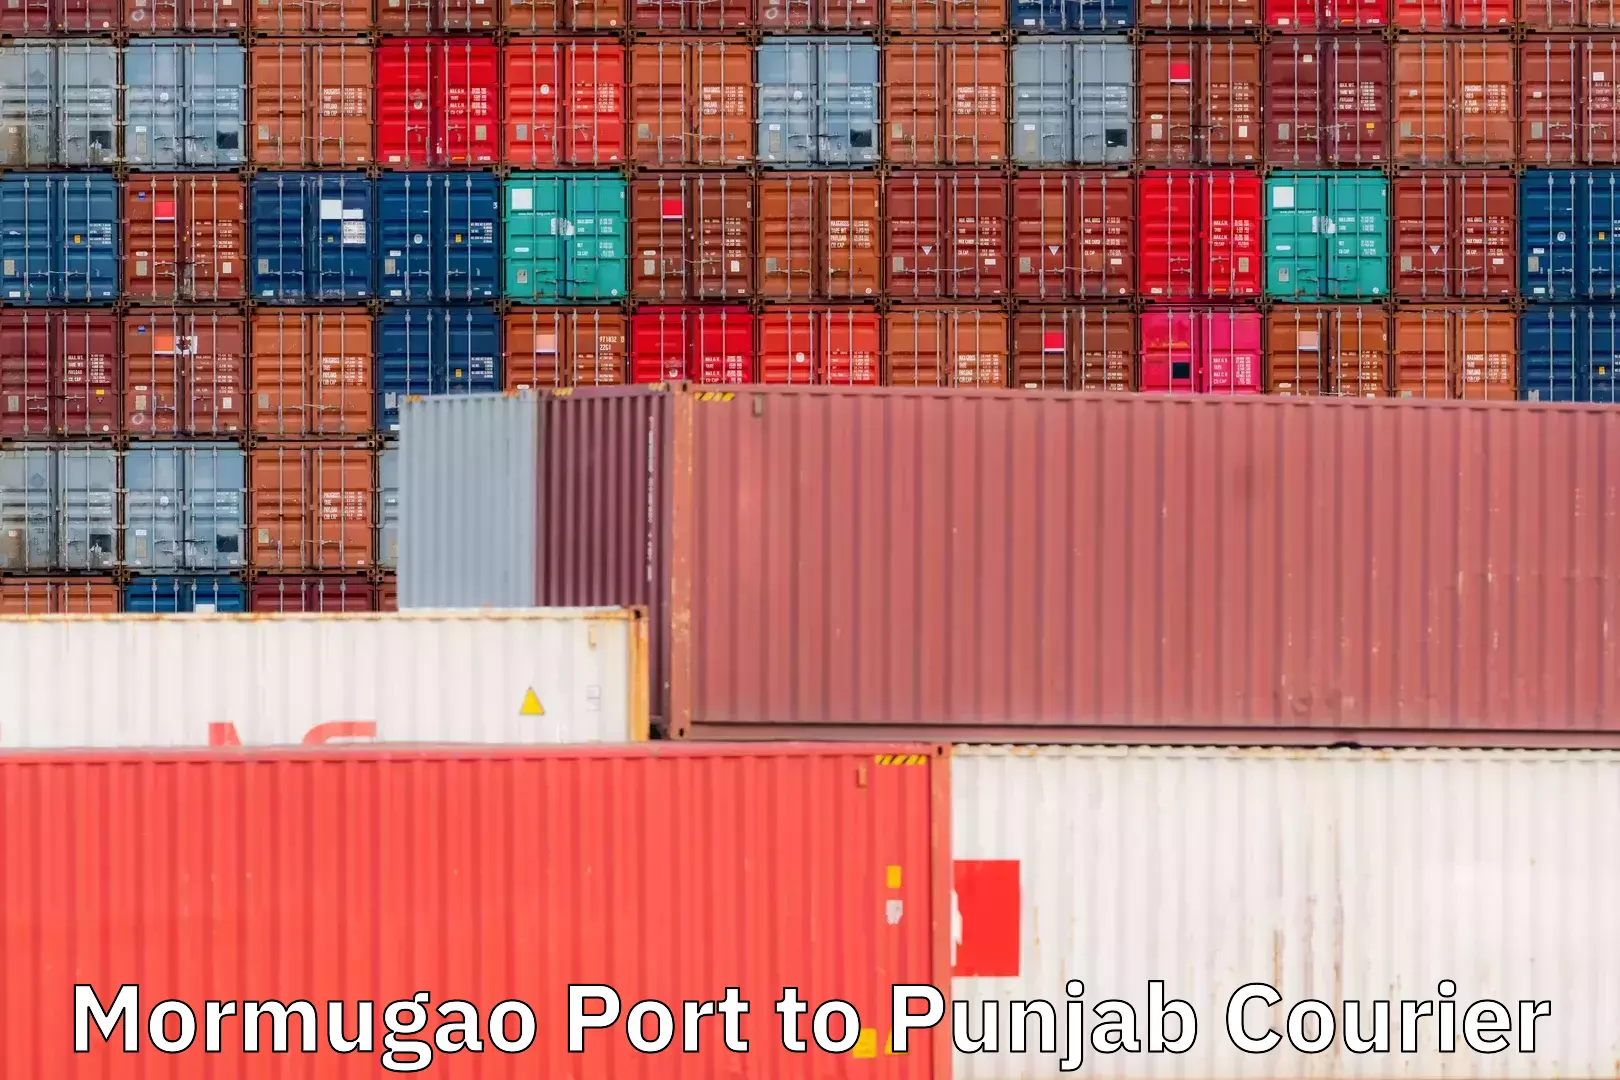 Dynamic courier services in Mormugao Port to Punjab